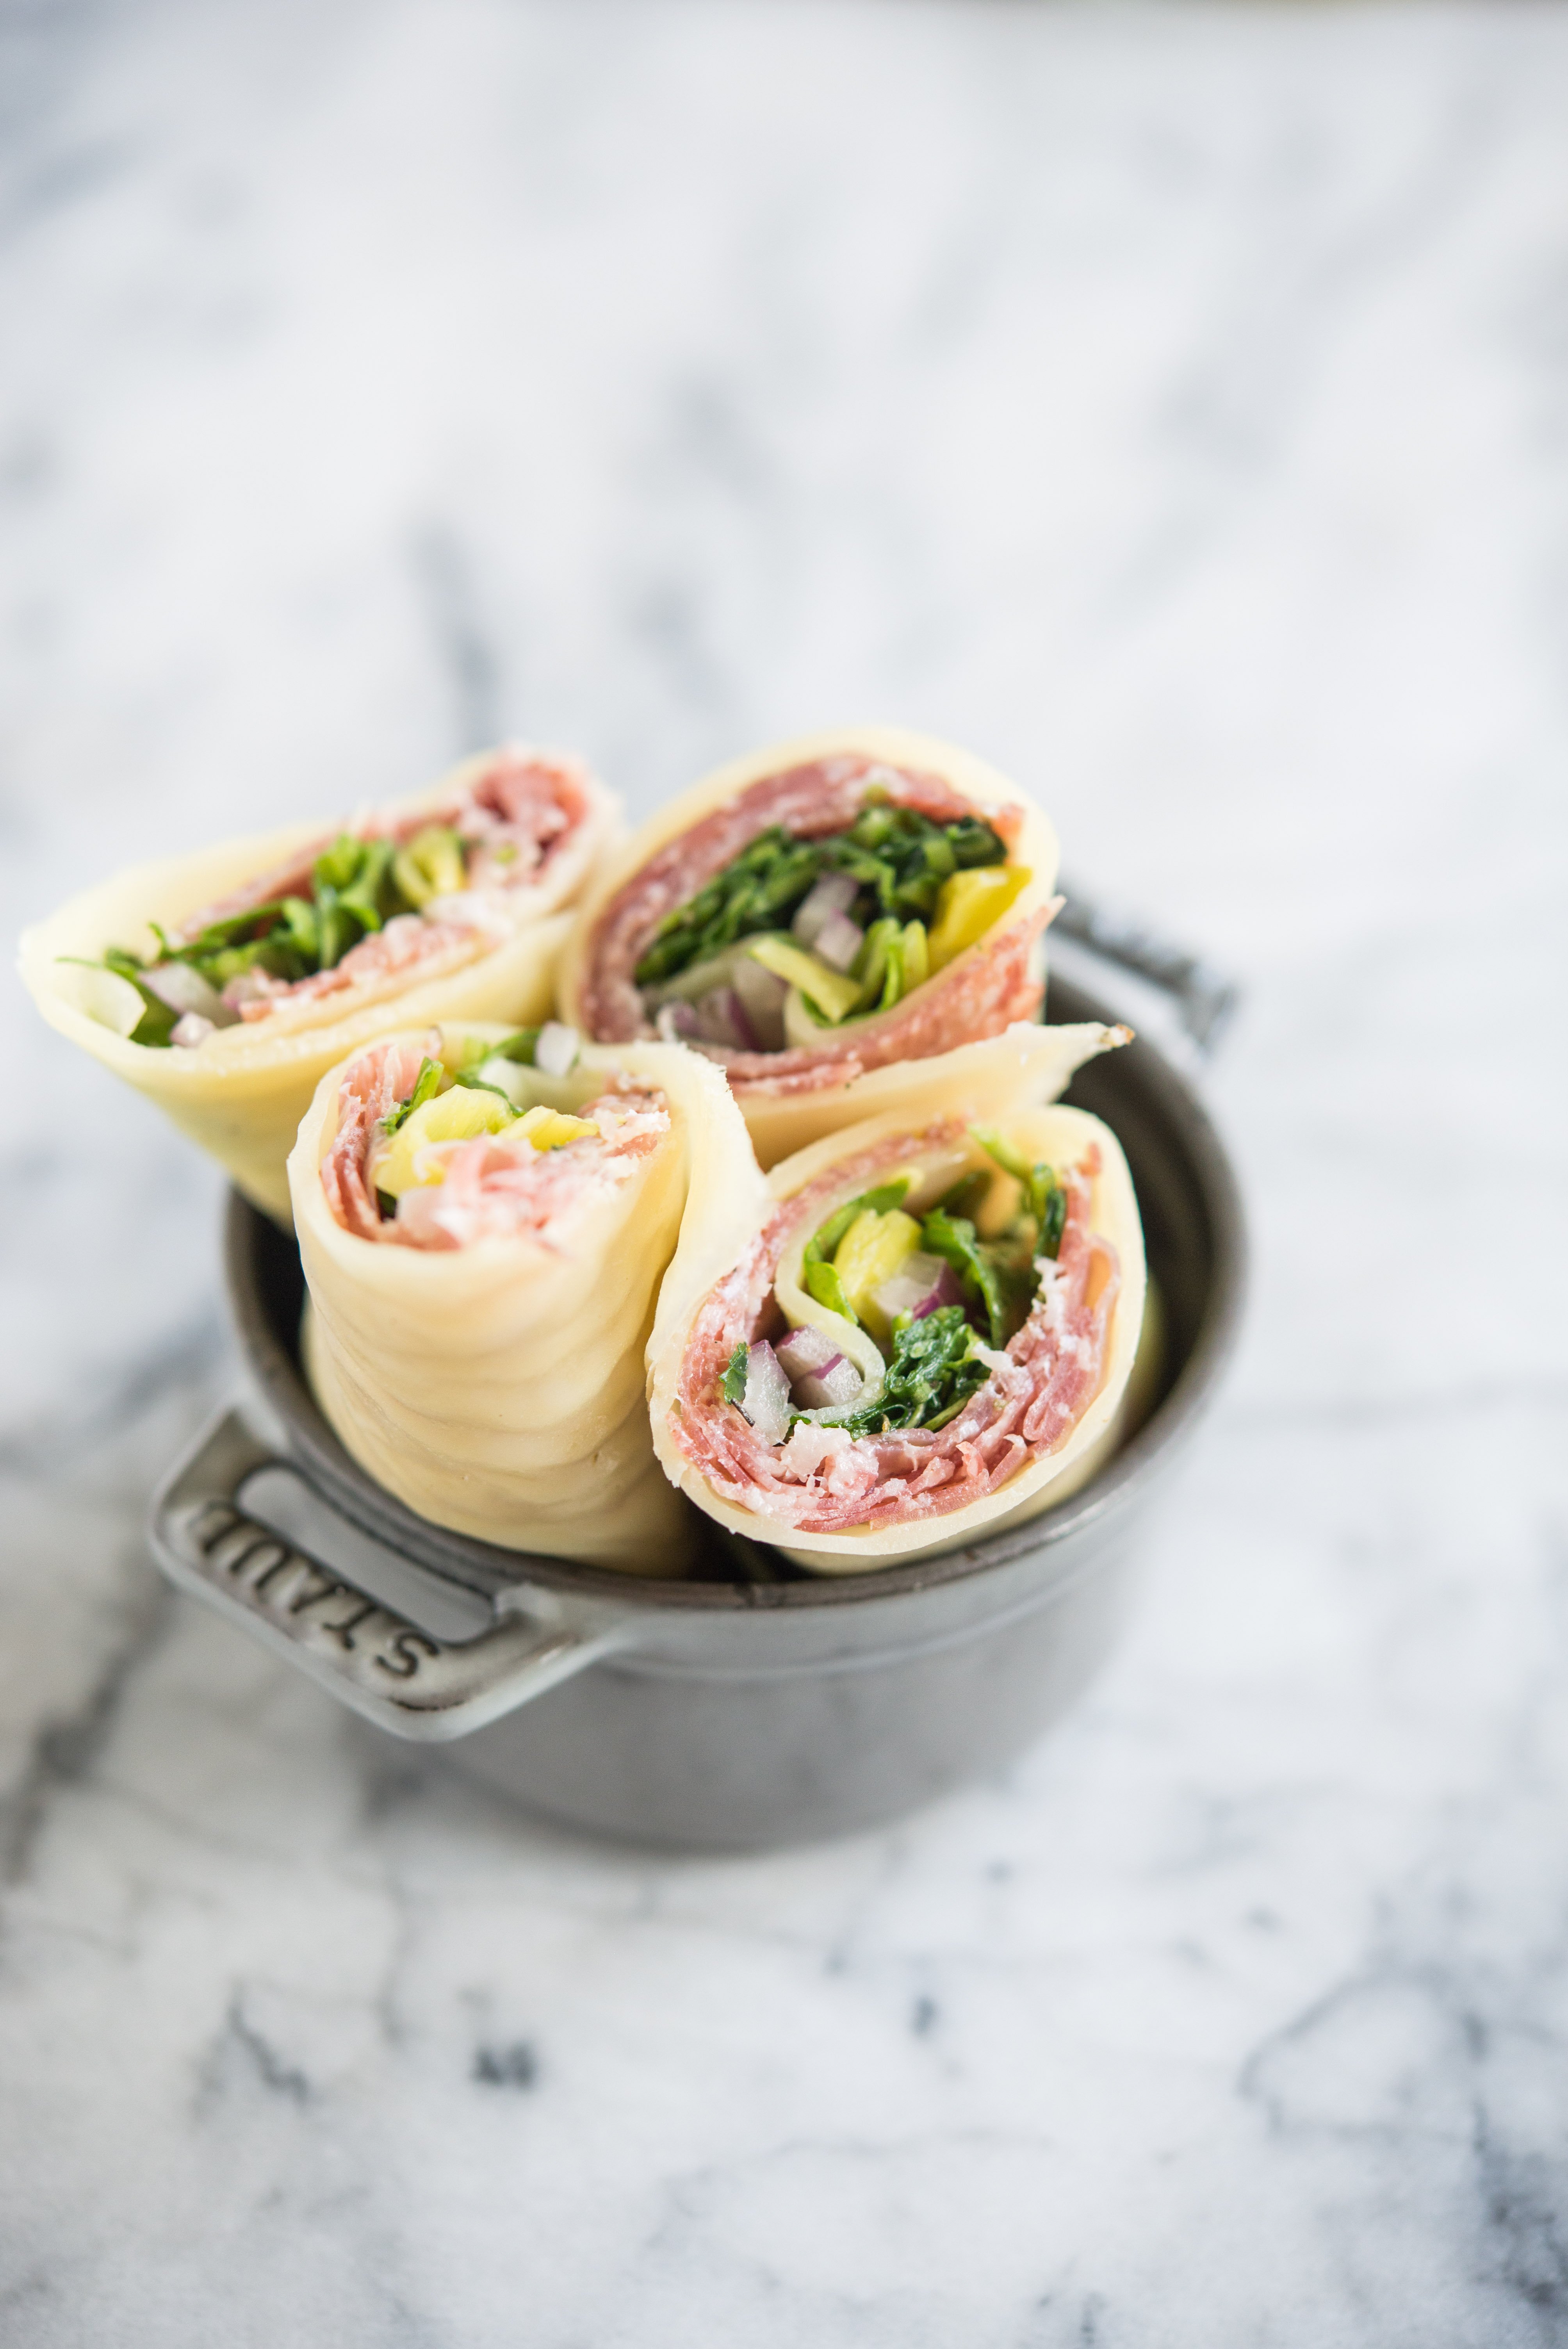 Keto Lunch wraps with Italian meats, arugula, pepperoncini, and red onion, cut in half in a small grey bowl on a marble board